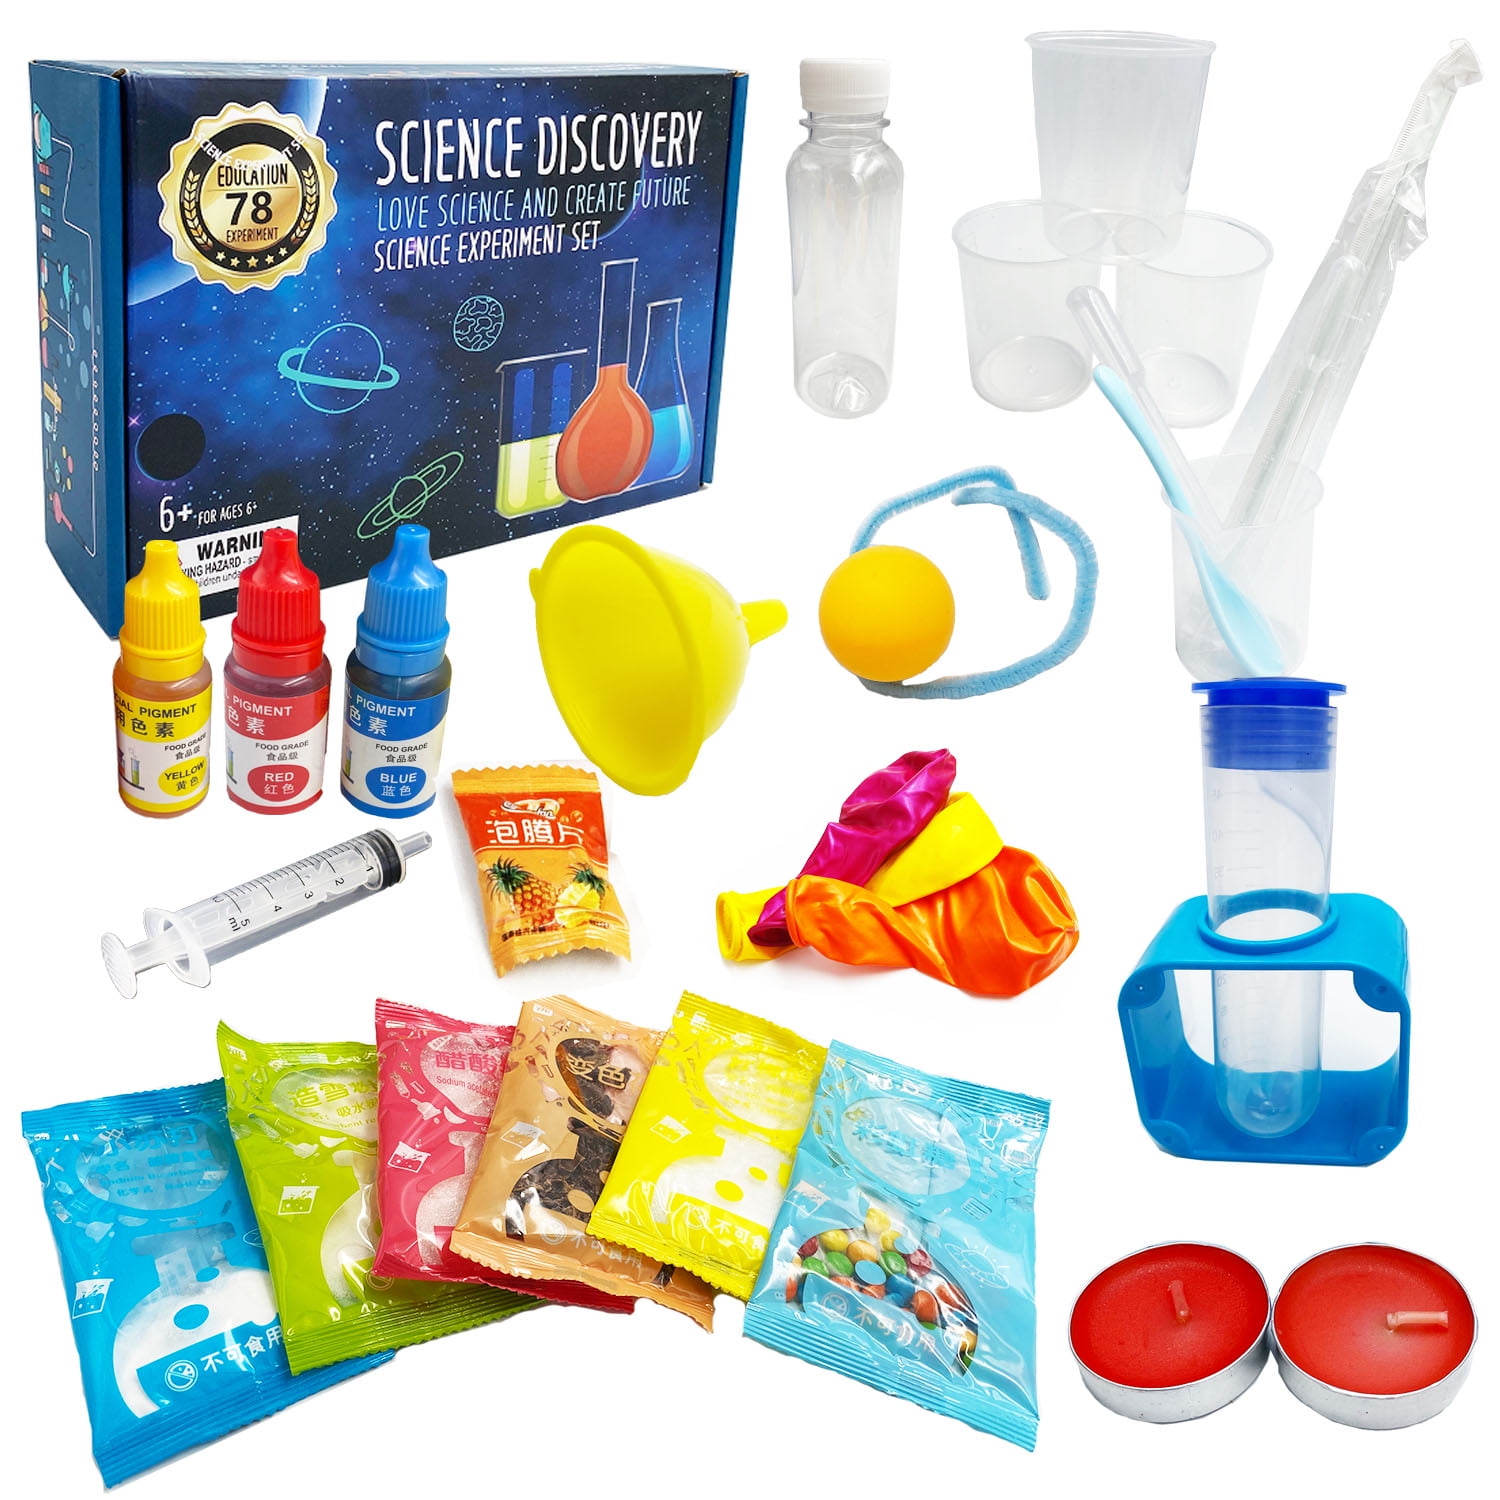  Science Kit for Kids 6-8, 24 Science Lab Experiments for Kids  4-6, STEM Educational Learning Kids Science Kits Age 8-12, Scientific Toys  Gift for Girls and Boys Age 3-5 : Toys & Games